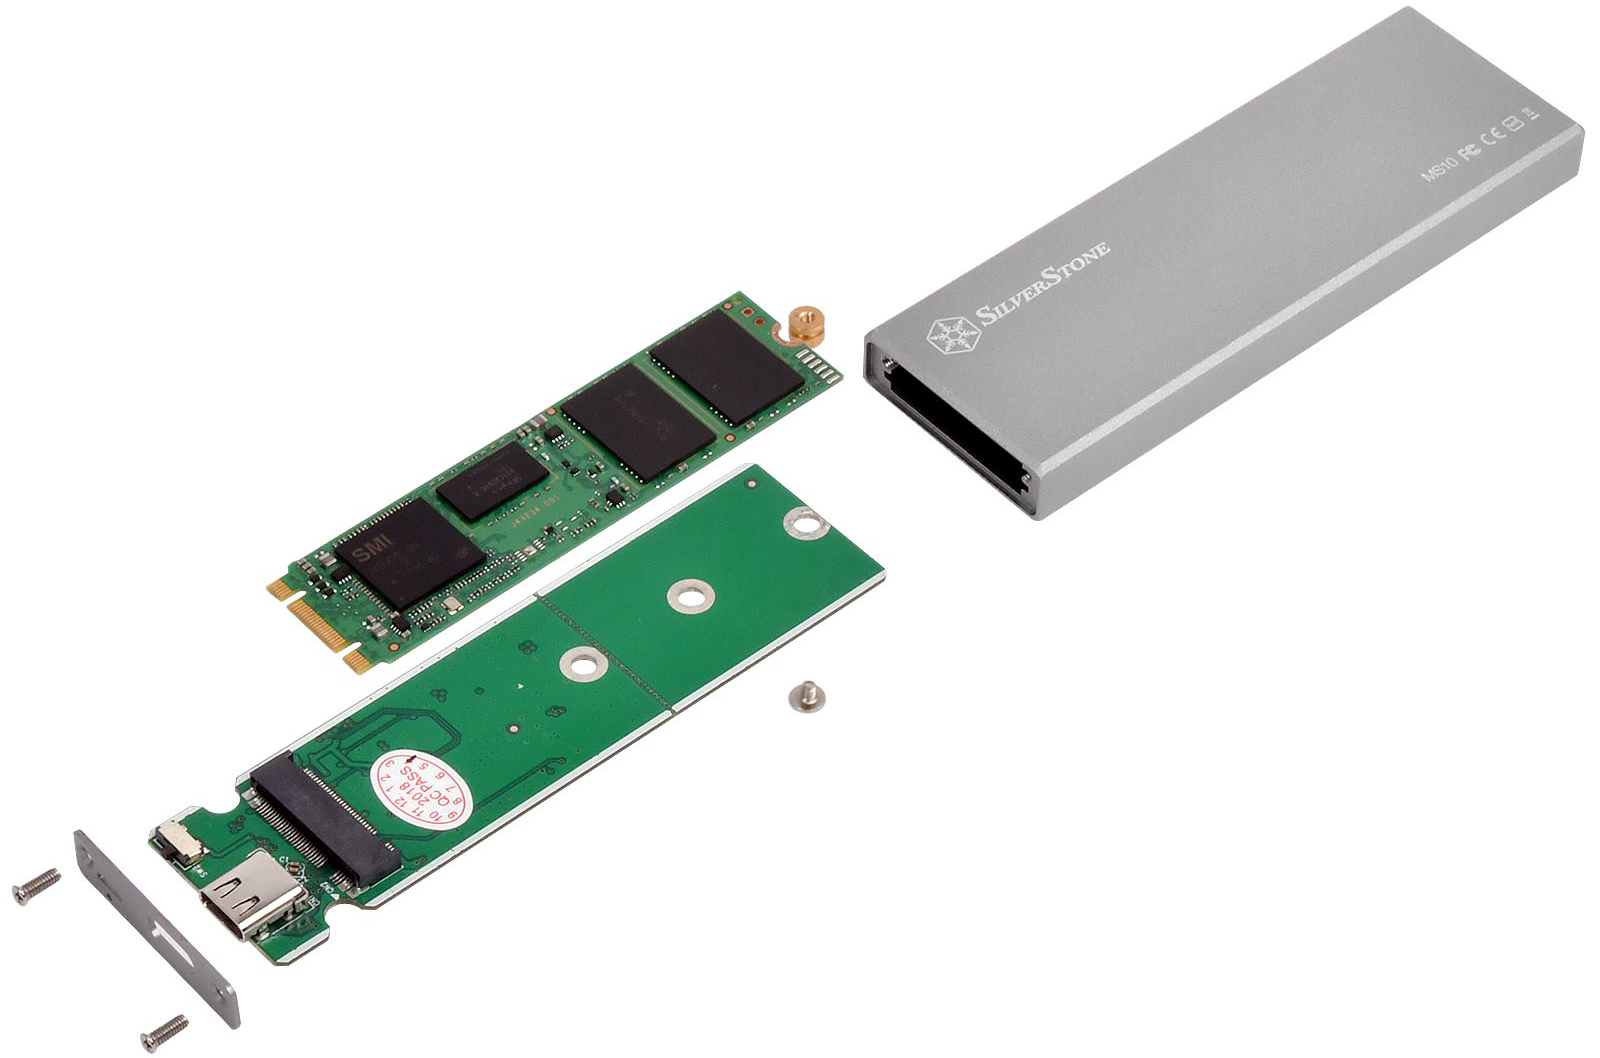 SilverStone Launches MS10: a 10 Gbps USB-C Adapter for SATA M.2 SSDs